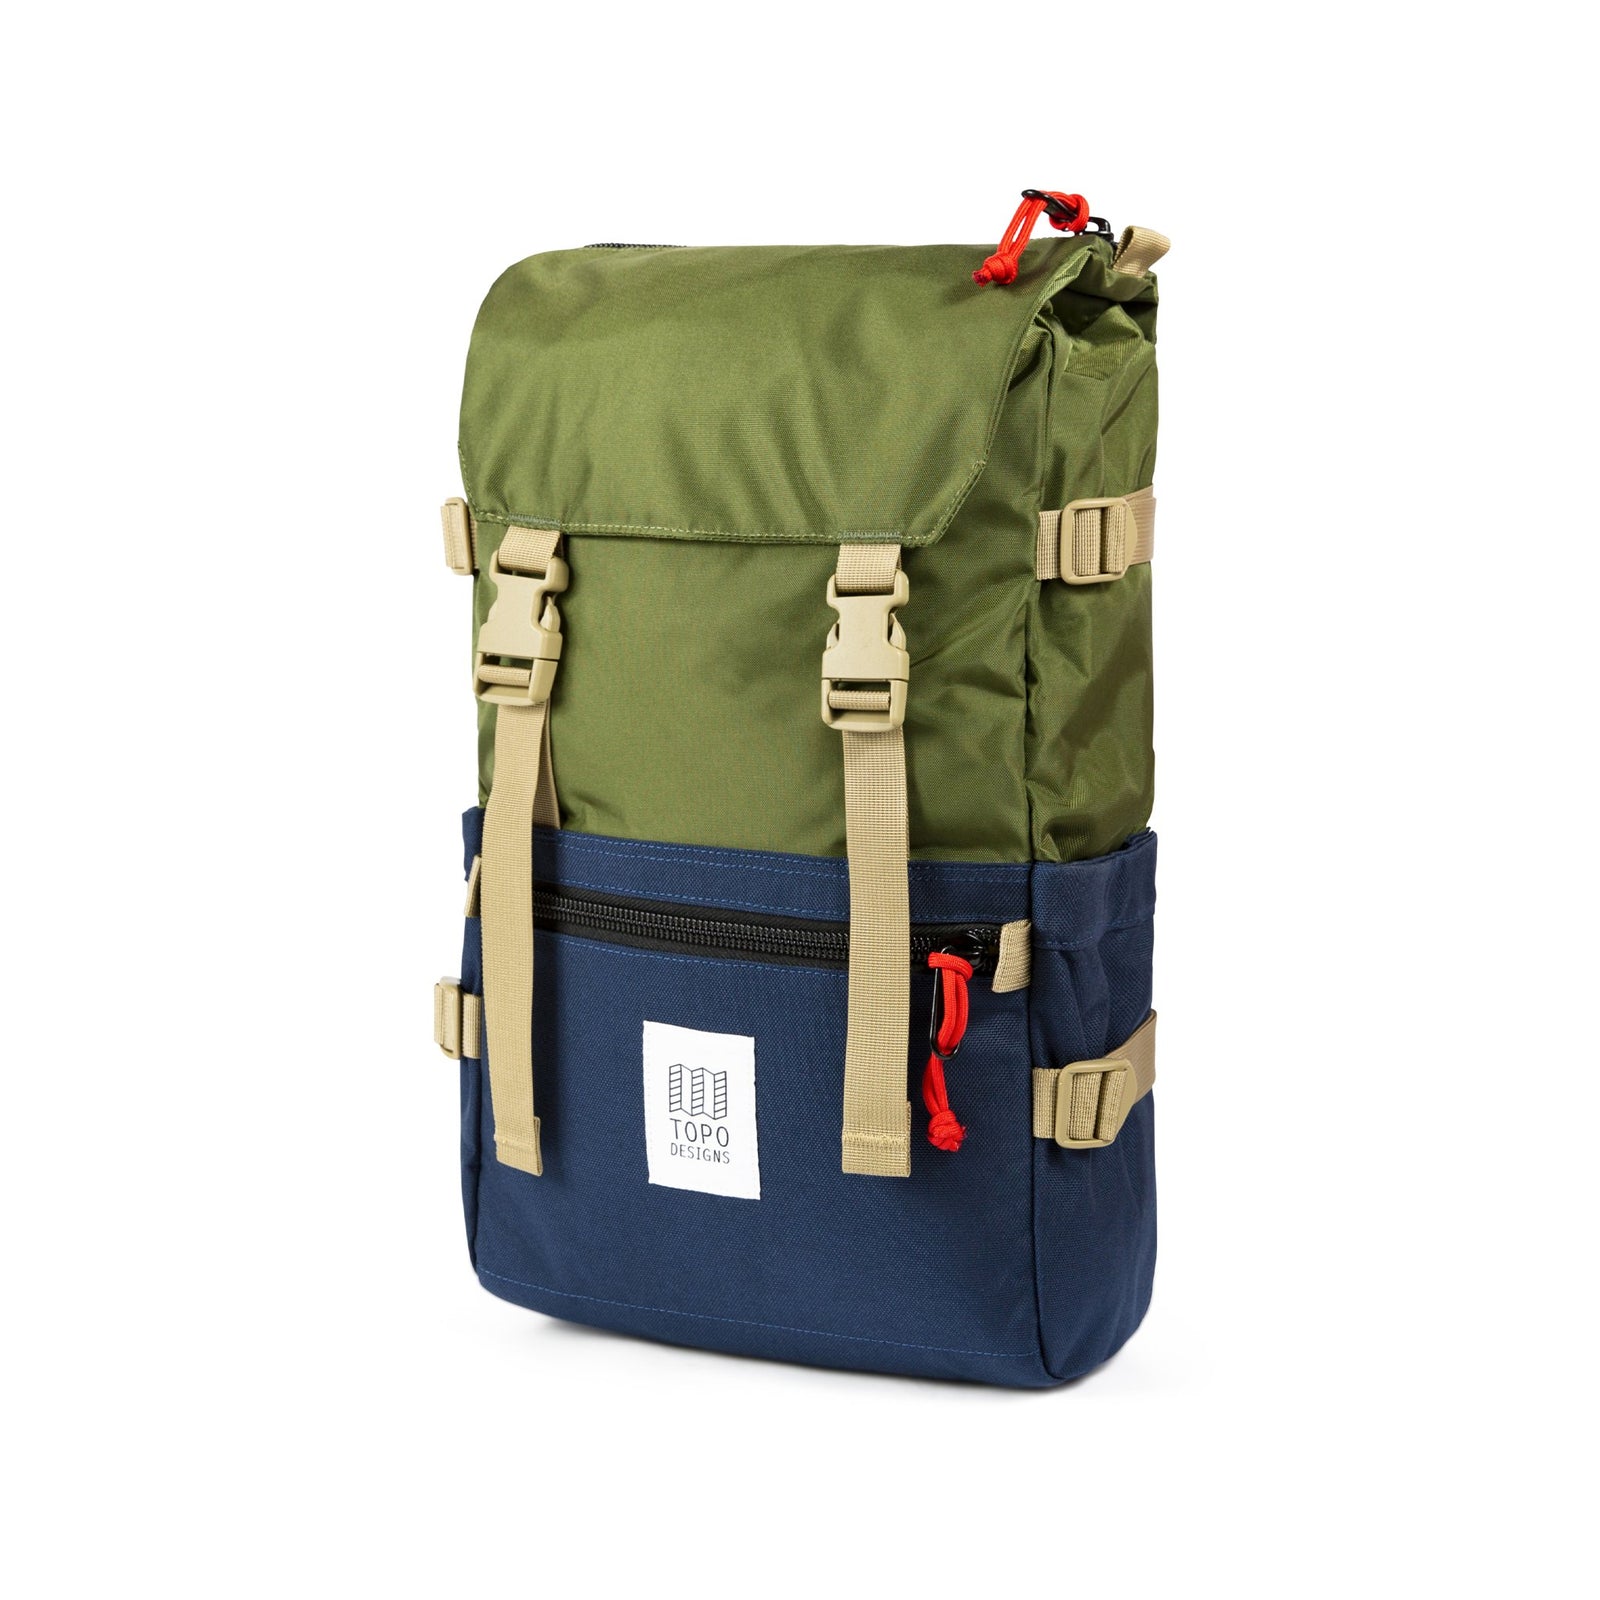 3/4 Front Product Shot of the Topo Designs Rover Pack Classic in "Olive / Navy".